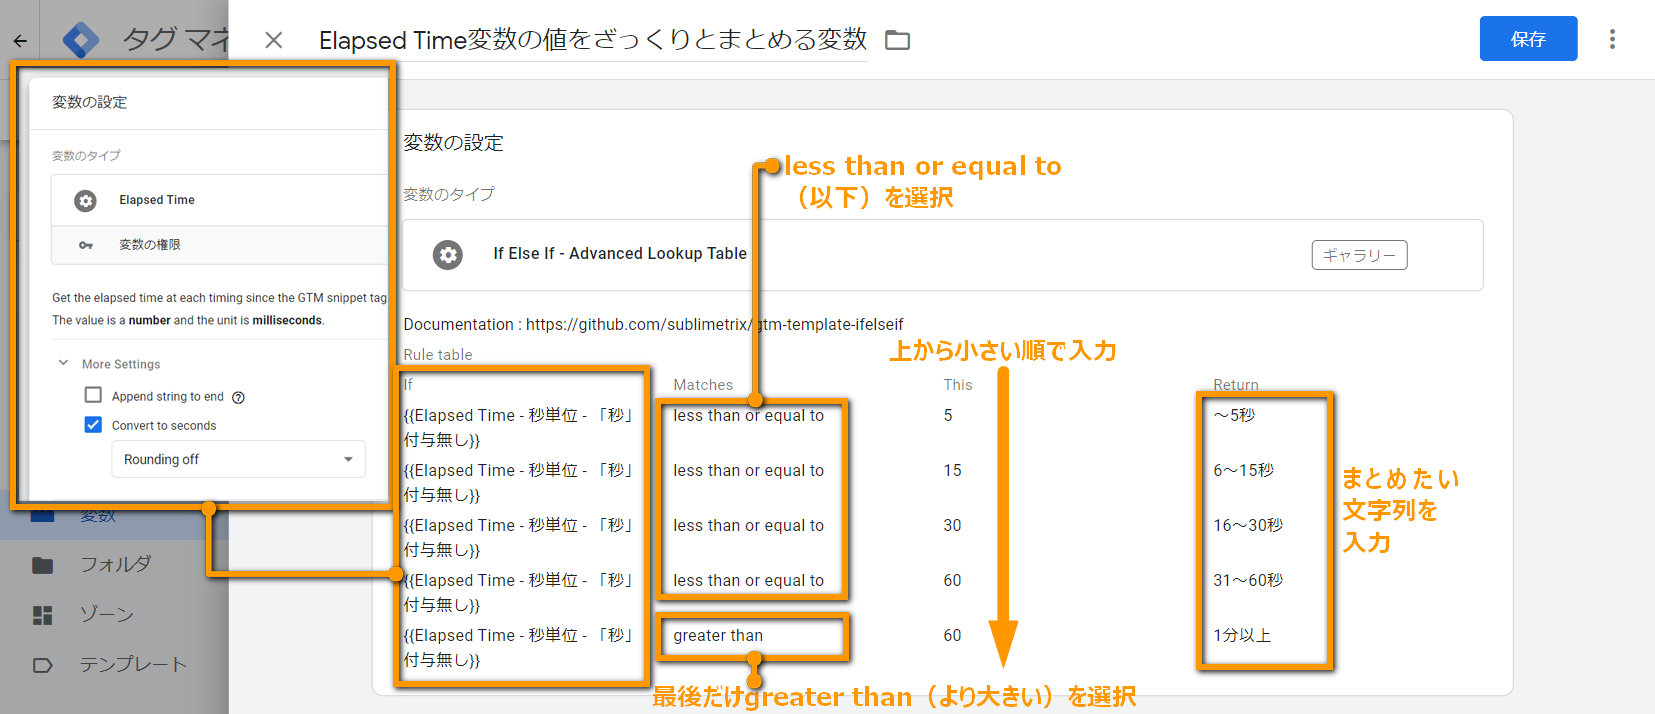 If Else If - Advanced Lookup Tableテンプレートを使ってElapsed Timeテンプレートを使いやすくする設定例